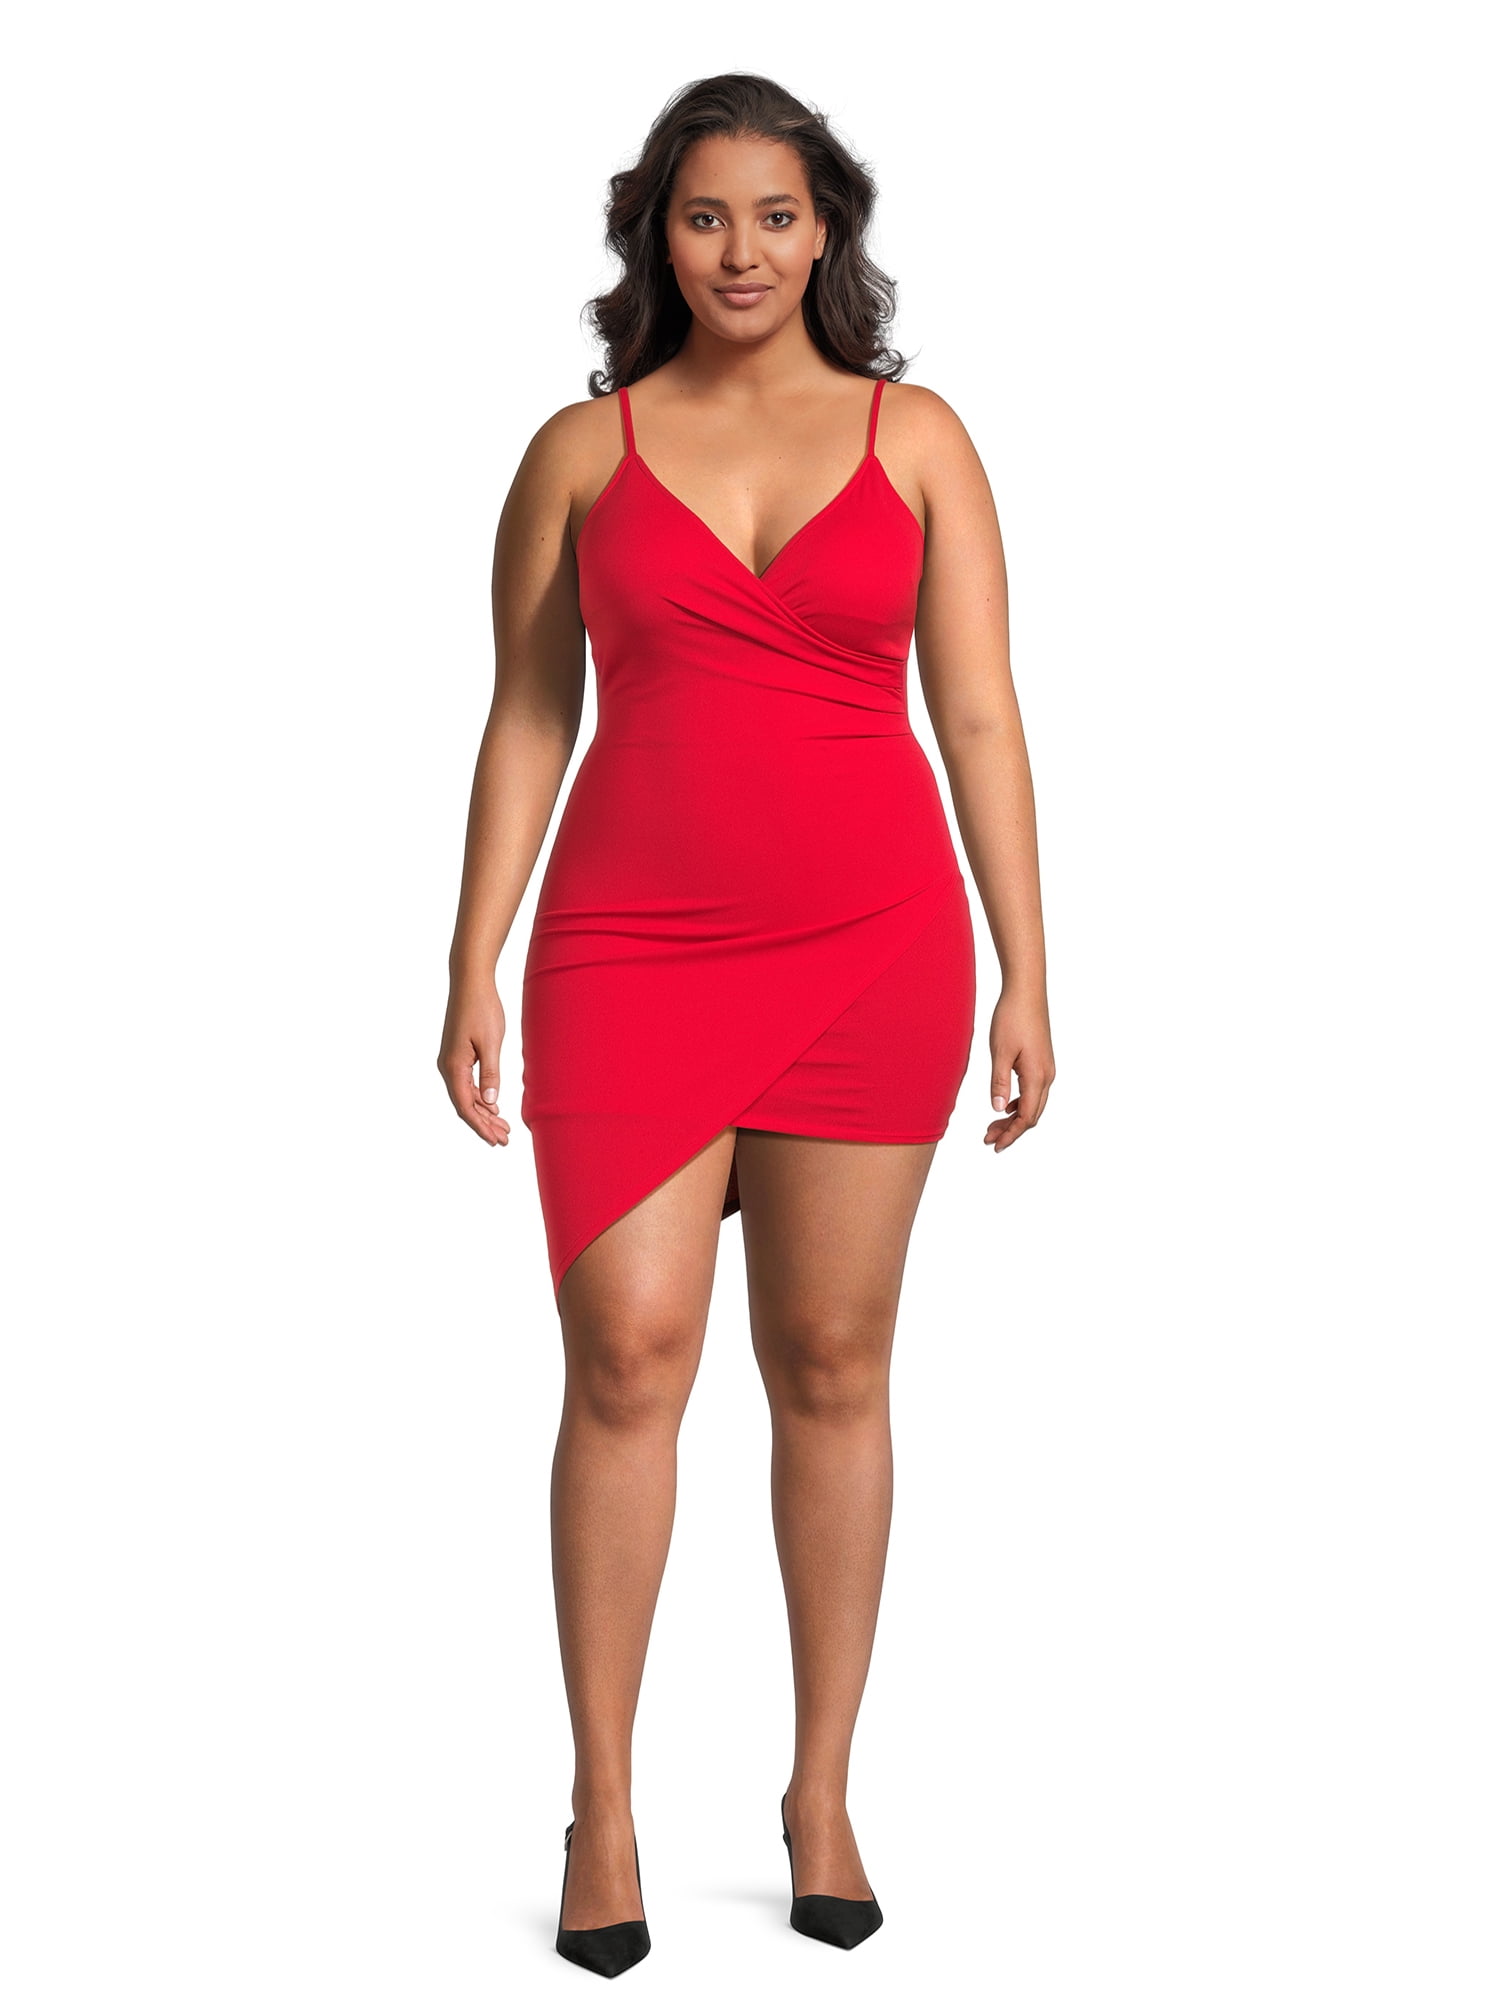 Planet Gold Big Girls Racerback Body Con Dress with Slit, Sizes 7-18 